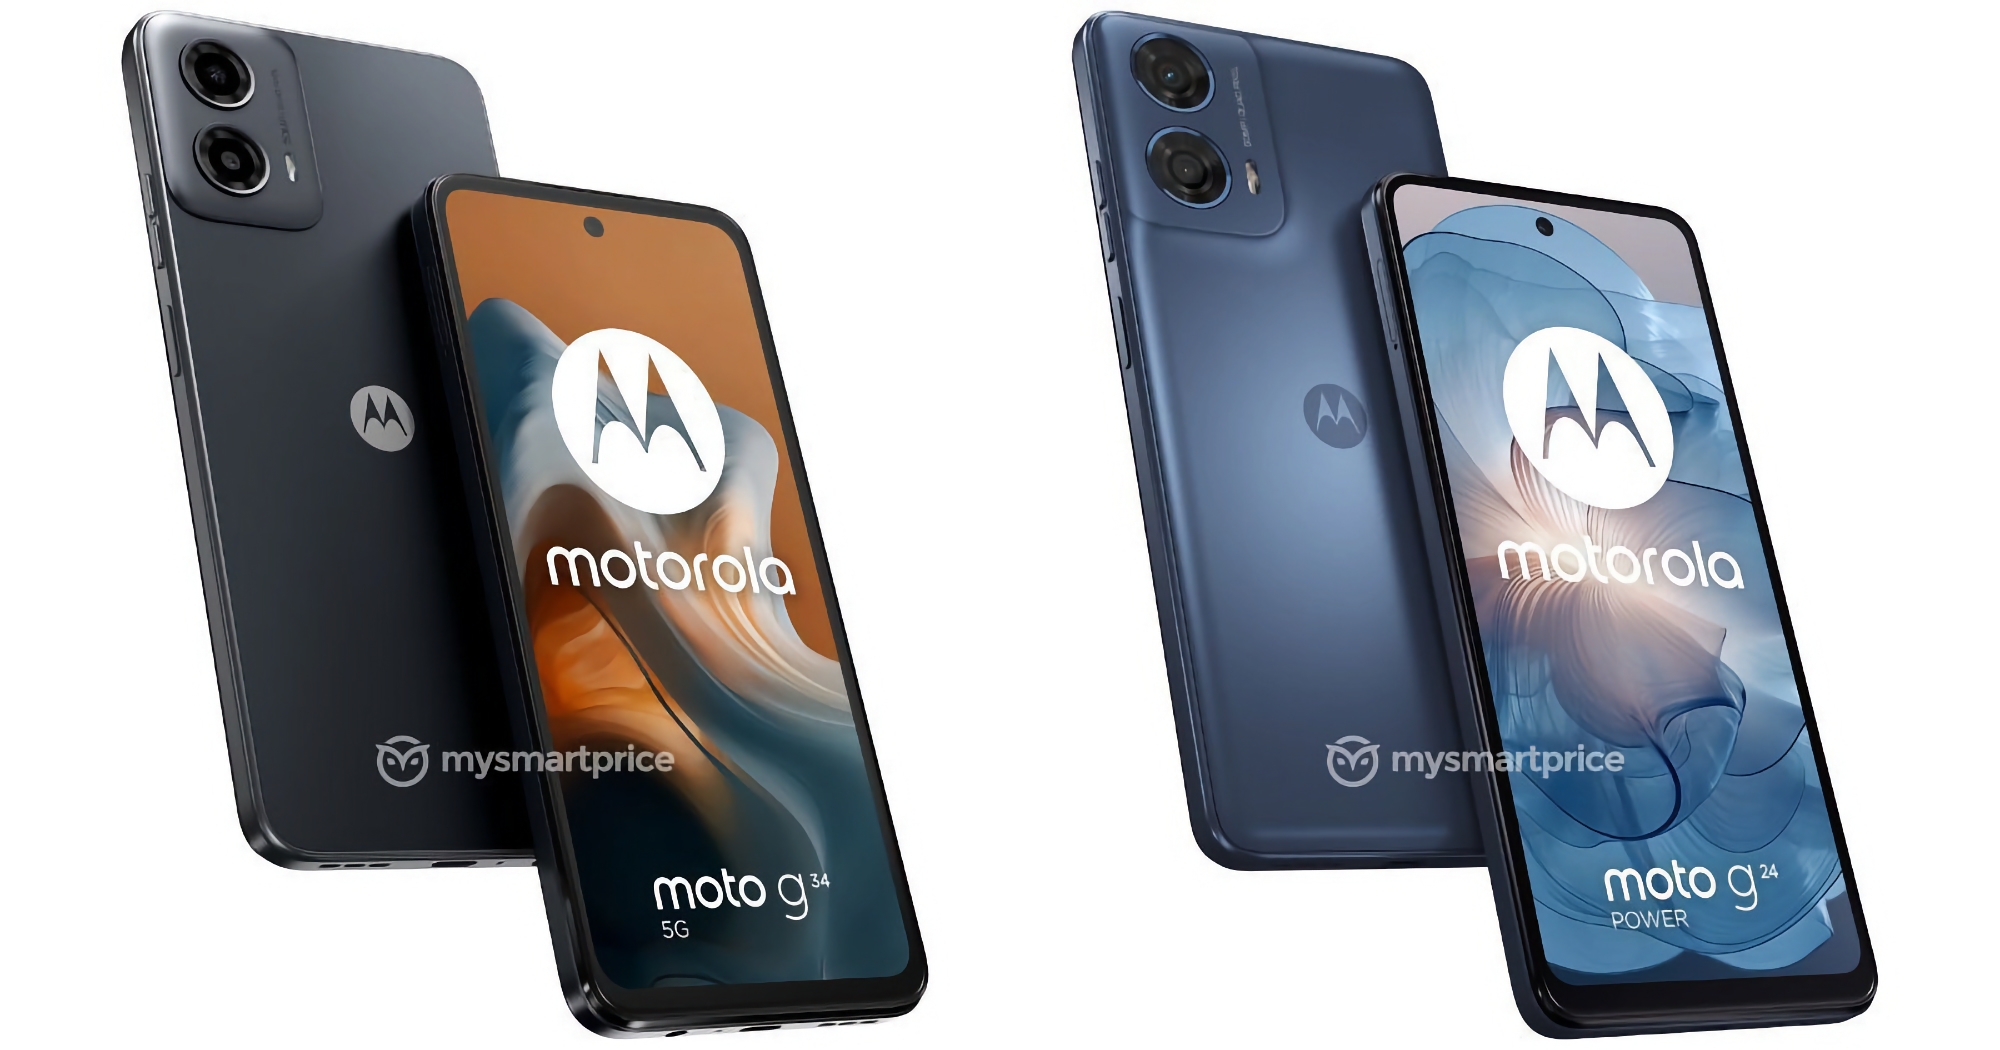 Motorola is preparing to release the Moto G24 Power and Moto G34, here's what the smartphones will look like